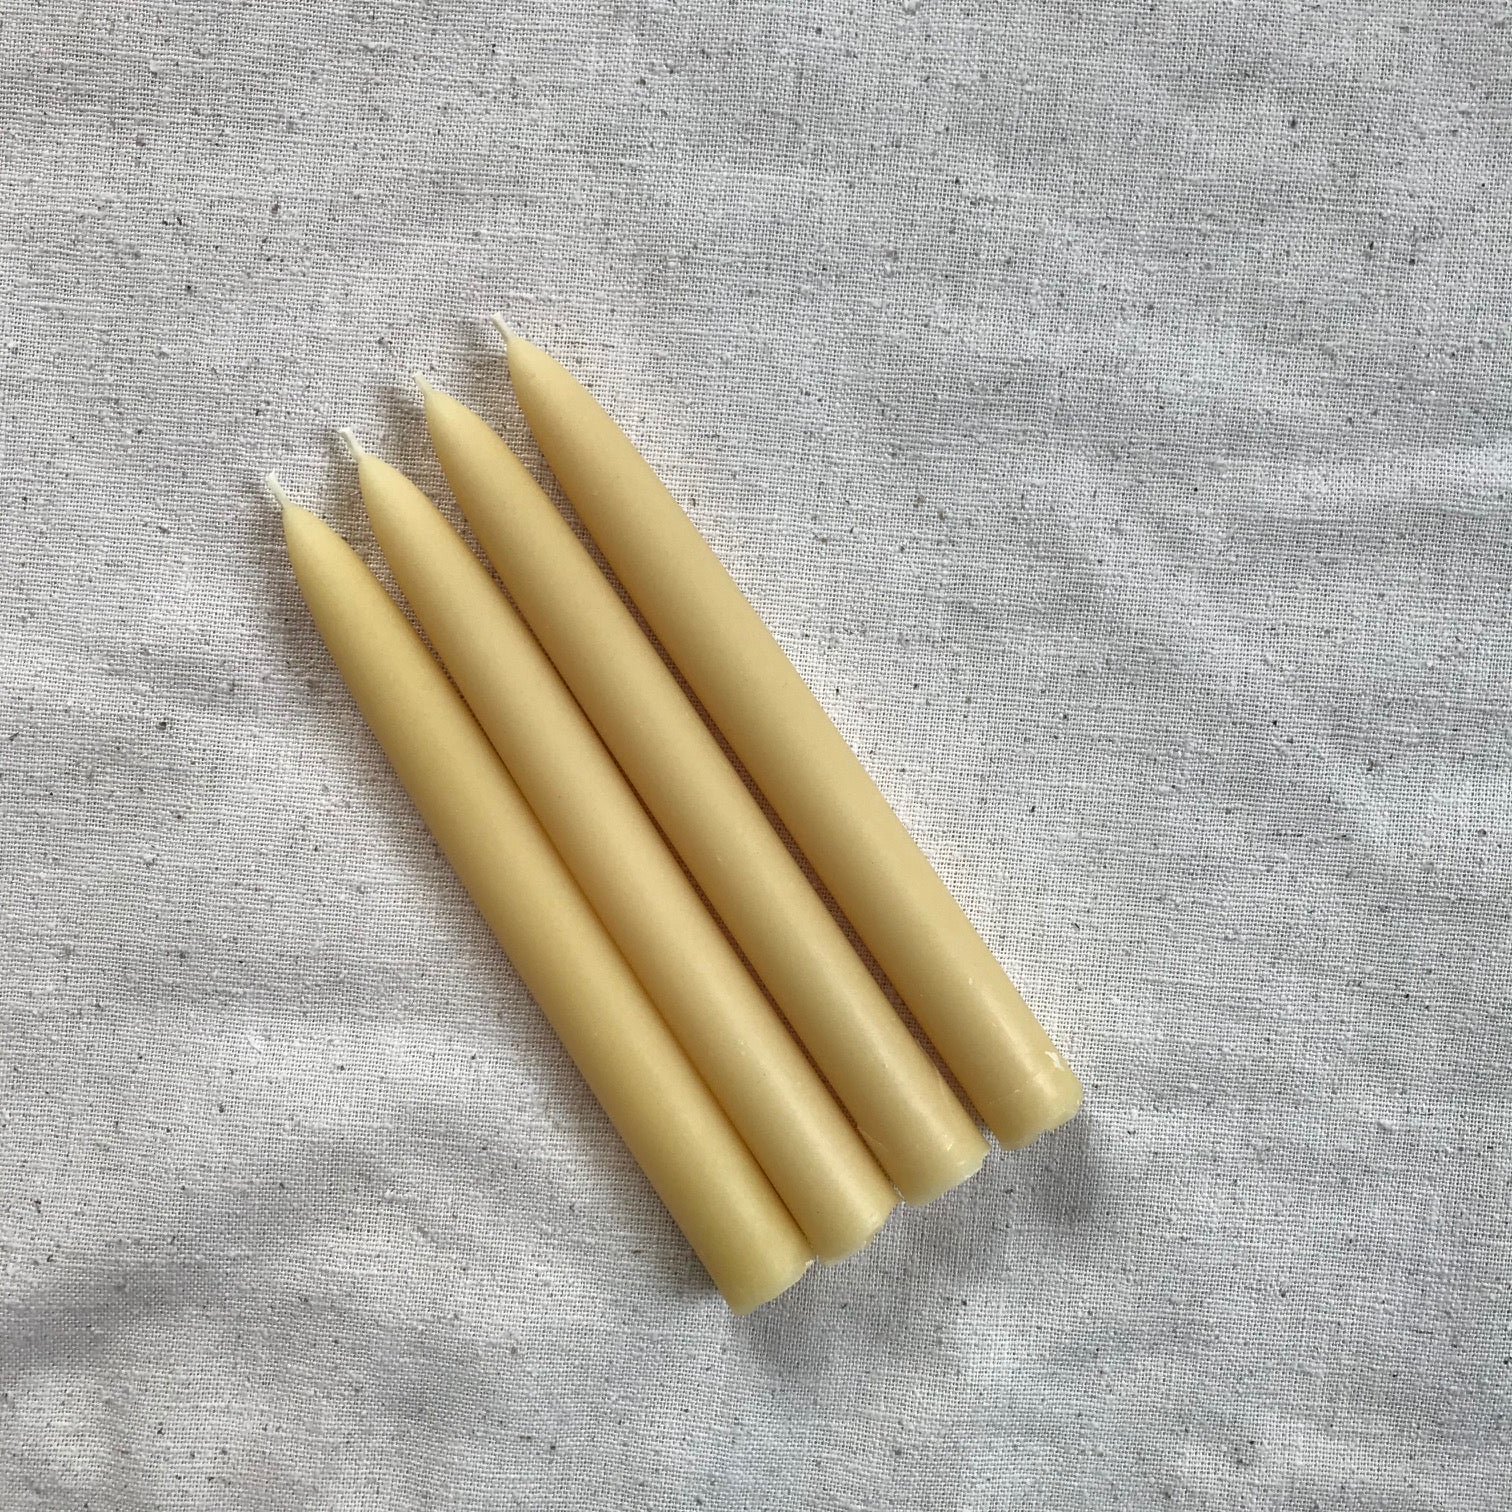 Taper Candle - 8 inch